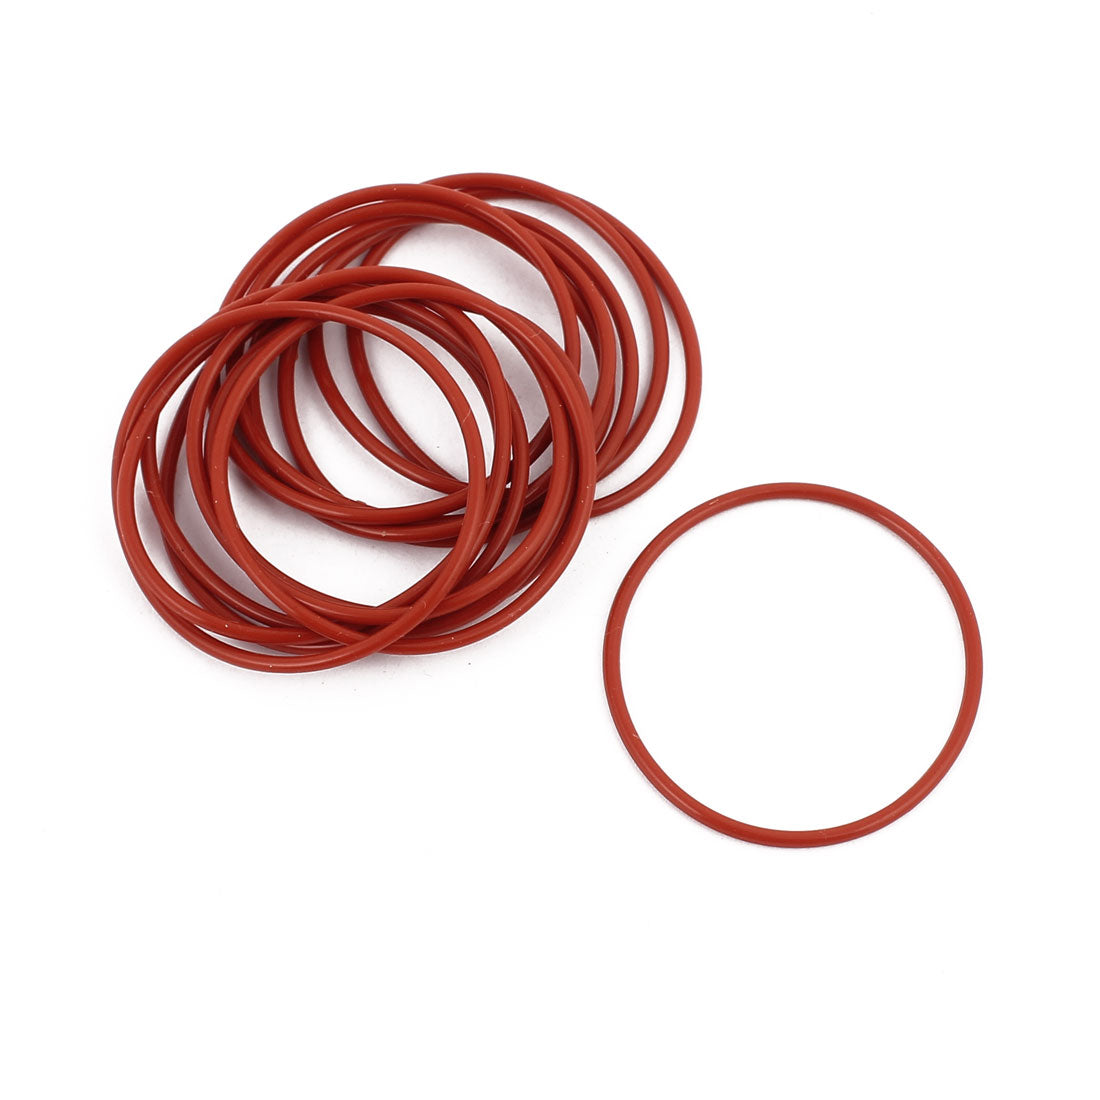 uxcell Uxcell 15Pcs 35mm x 1.5mm Rubber O-rings NBR Heat Resistant Sealing Ring Grommets Red